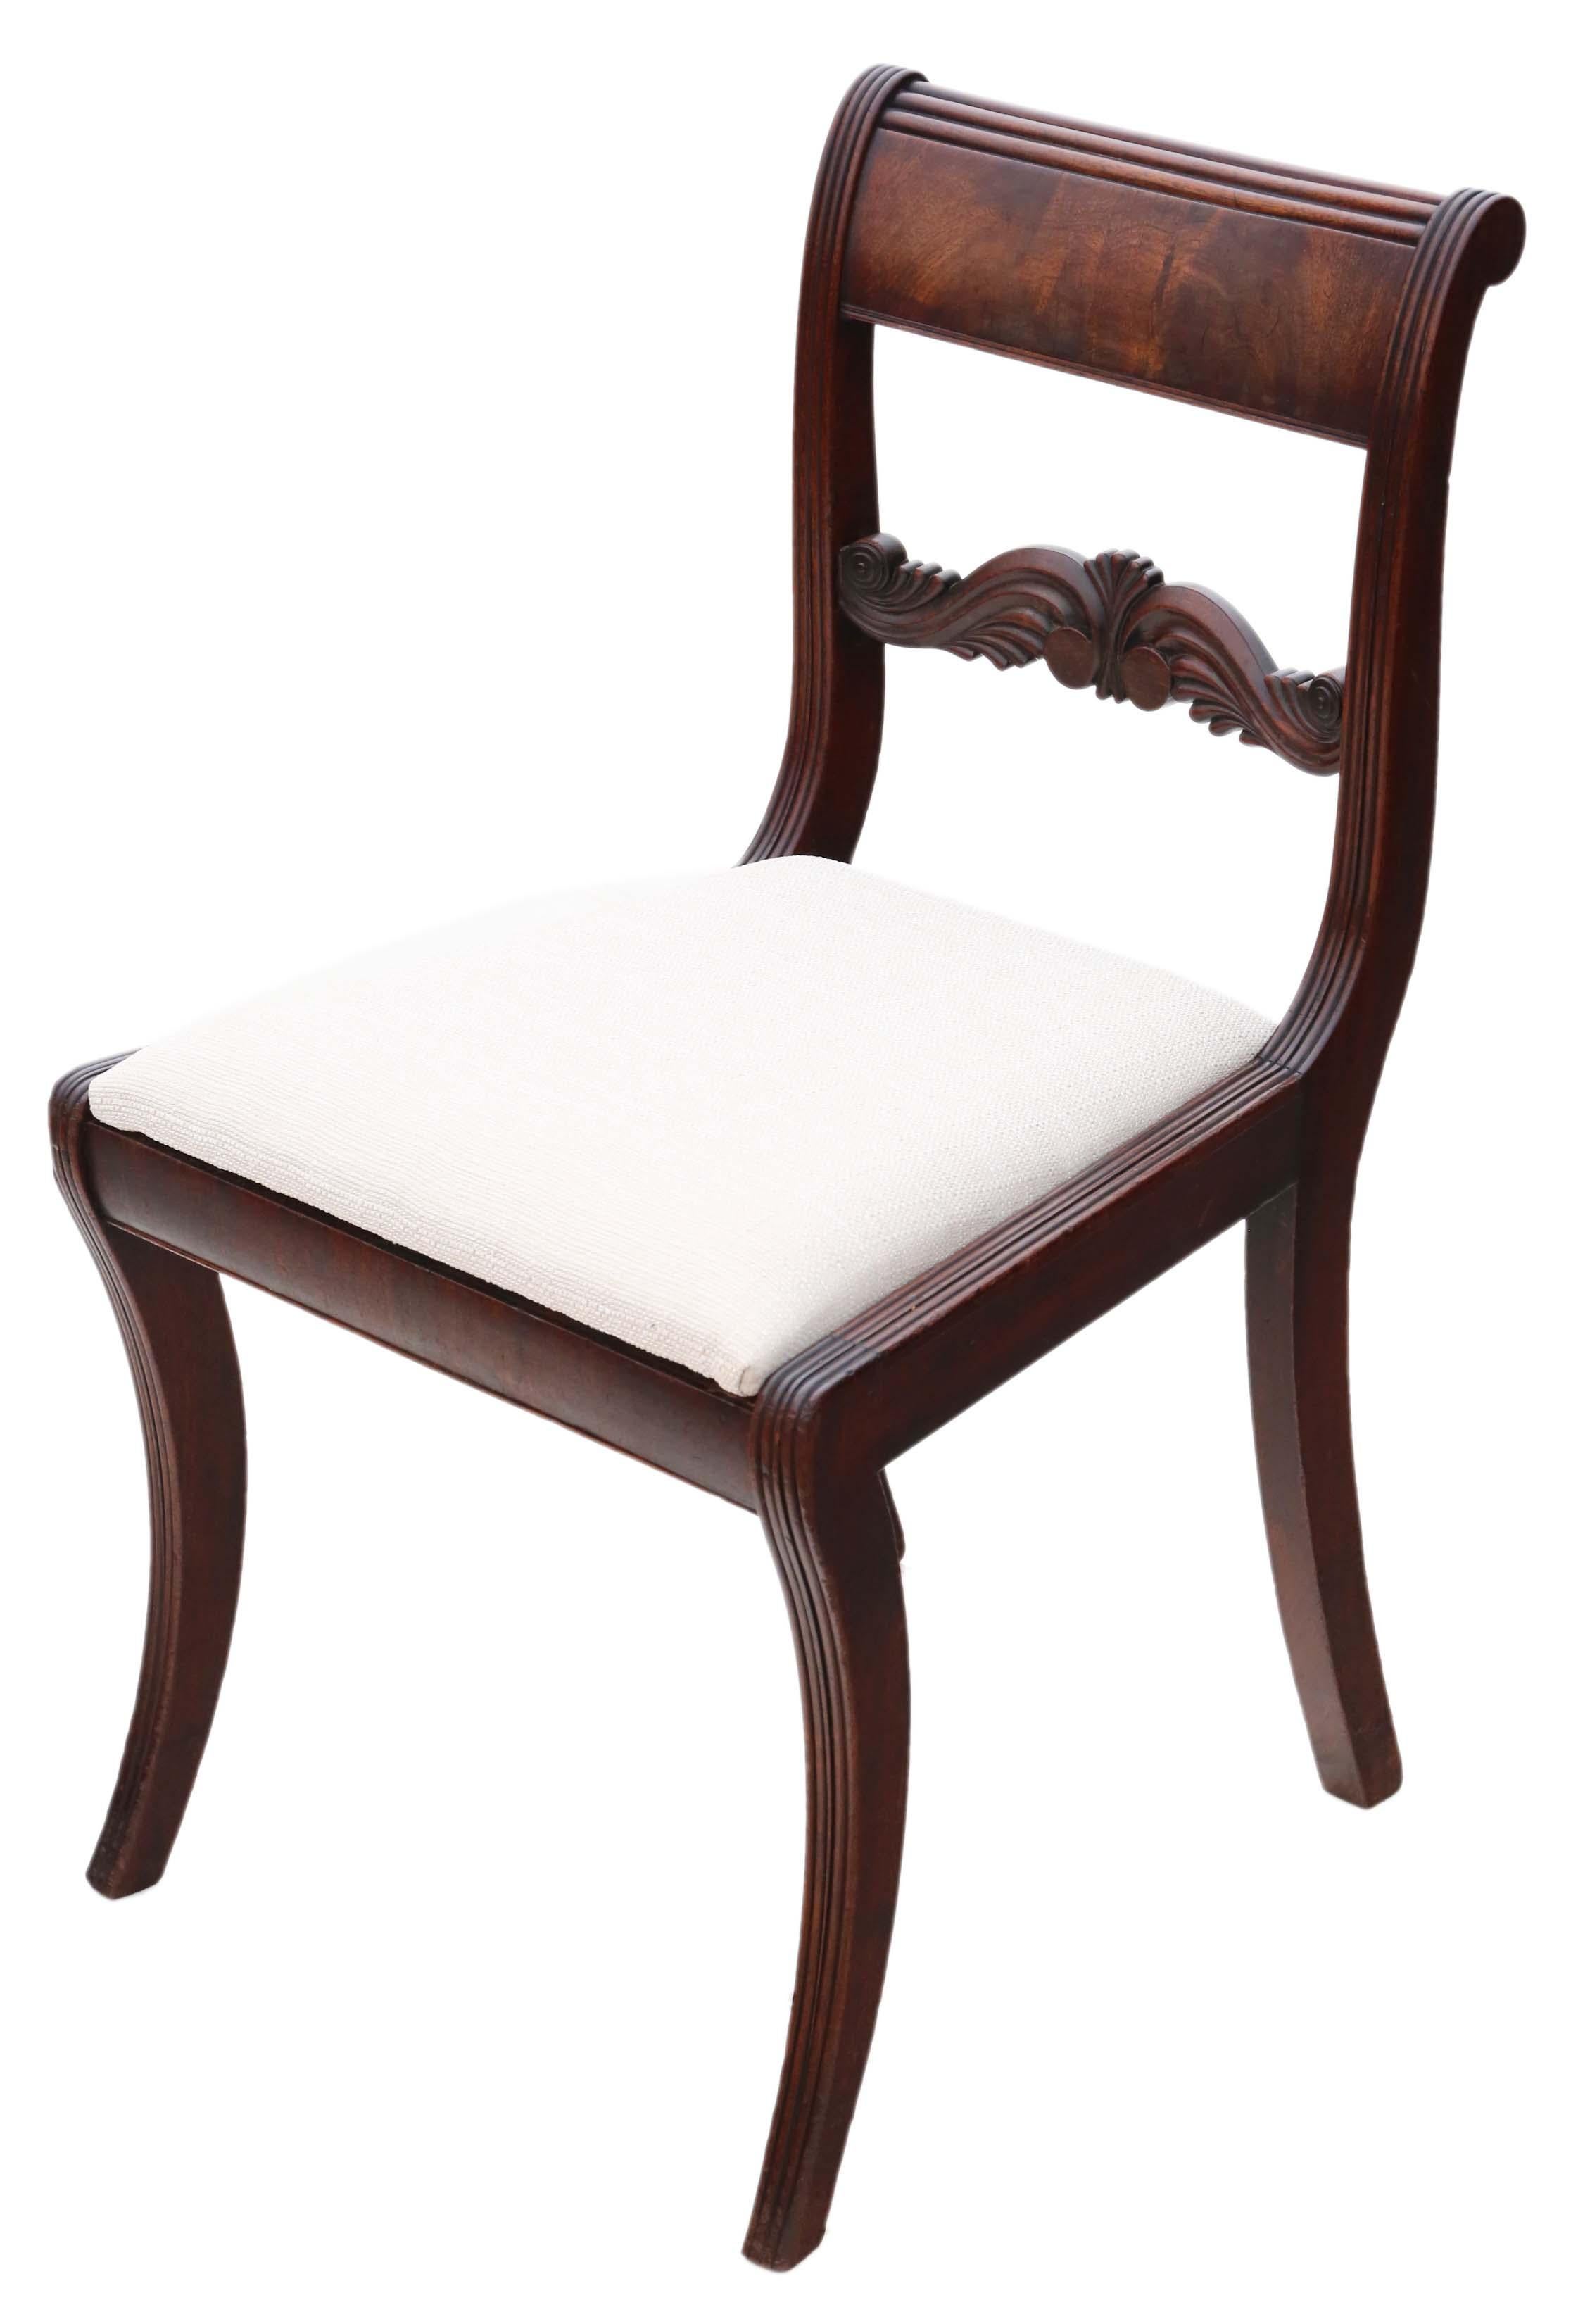 Early 19th Century Antique Pair of Regency Mahogany Dining Side Hall Bedroom Chairs, circa 1825